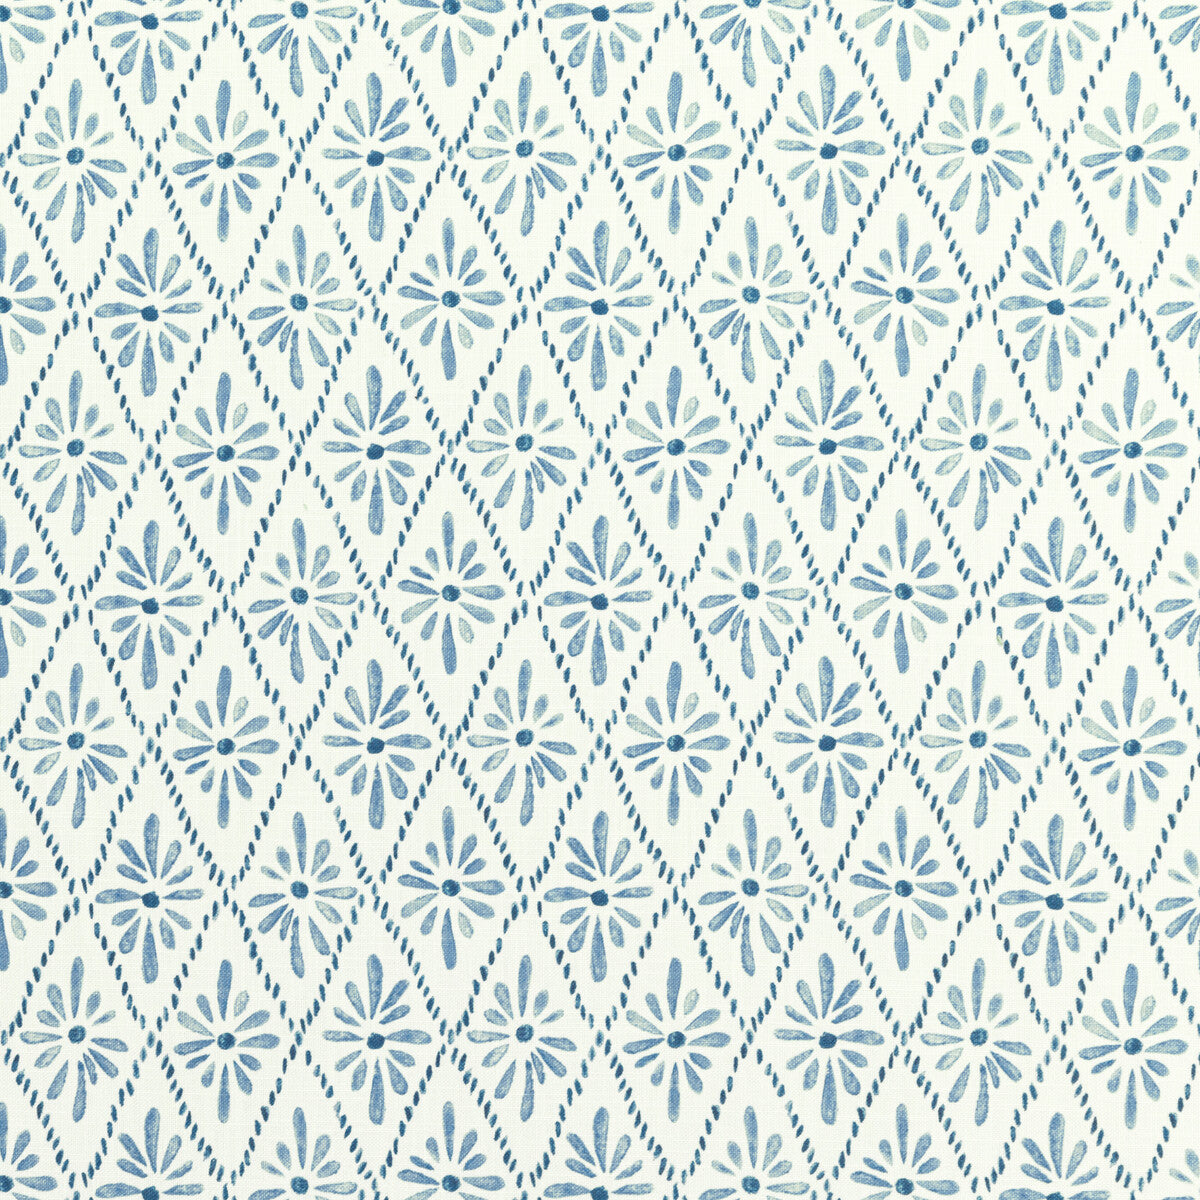 Malina fabric in larkspur color - pattern MALINA.15.0 - by Kravet Basics in the Monterey collection